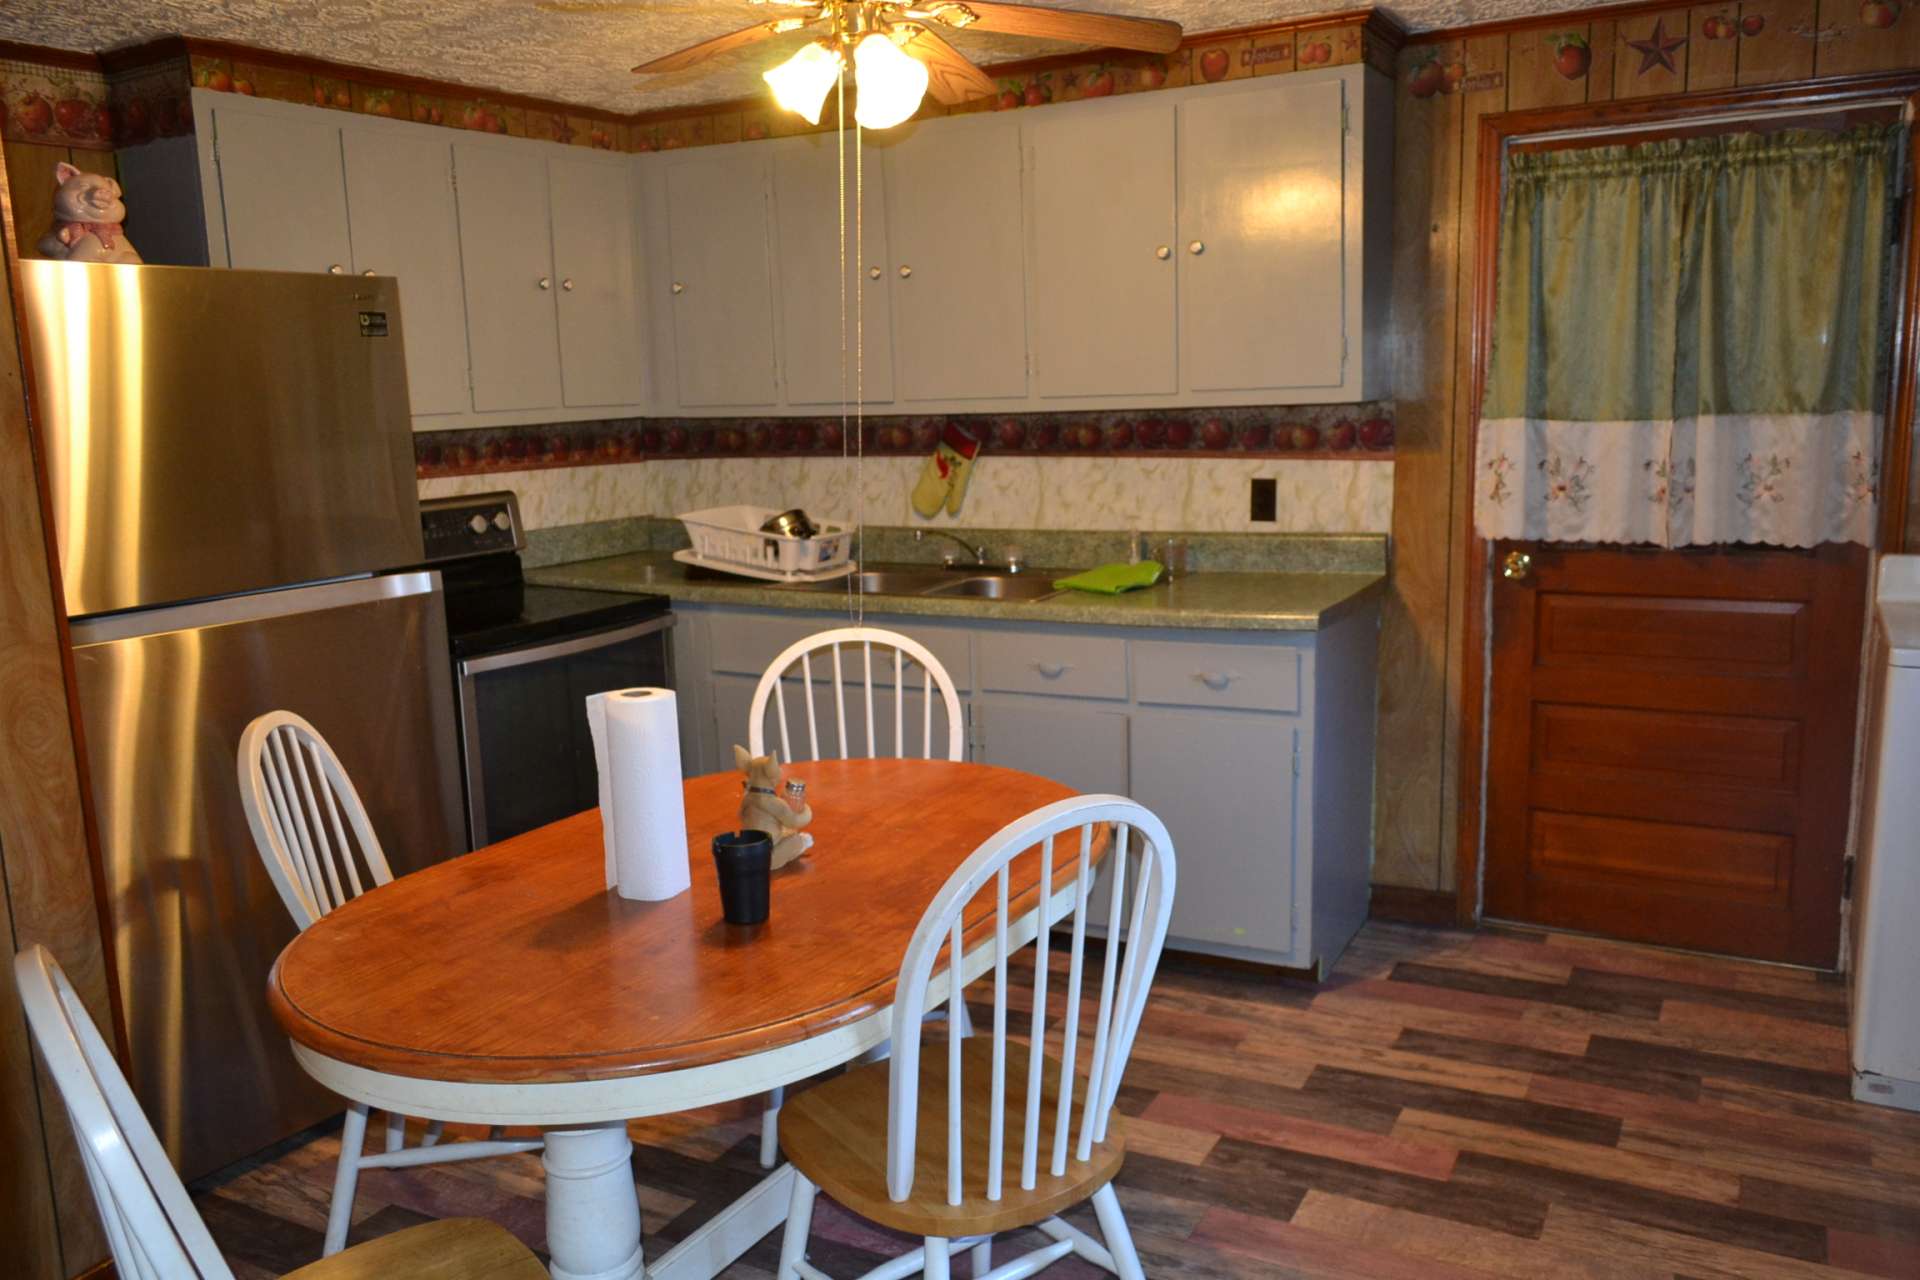 The farmhouse-style eat-in kitchen provides a warm and inviting atmosphere.